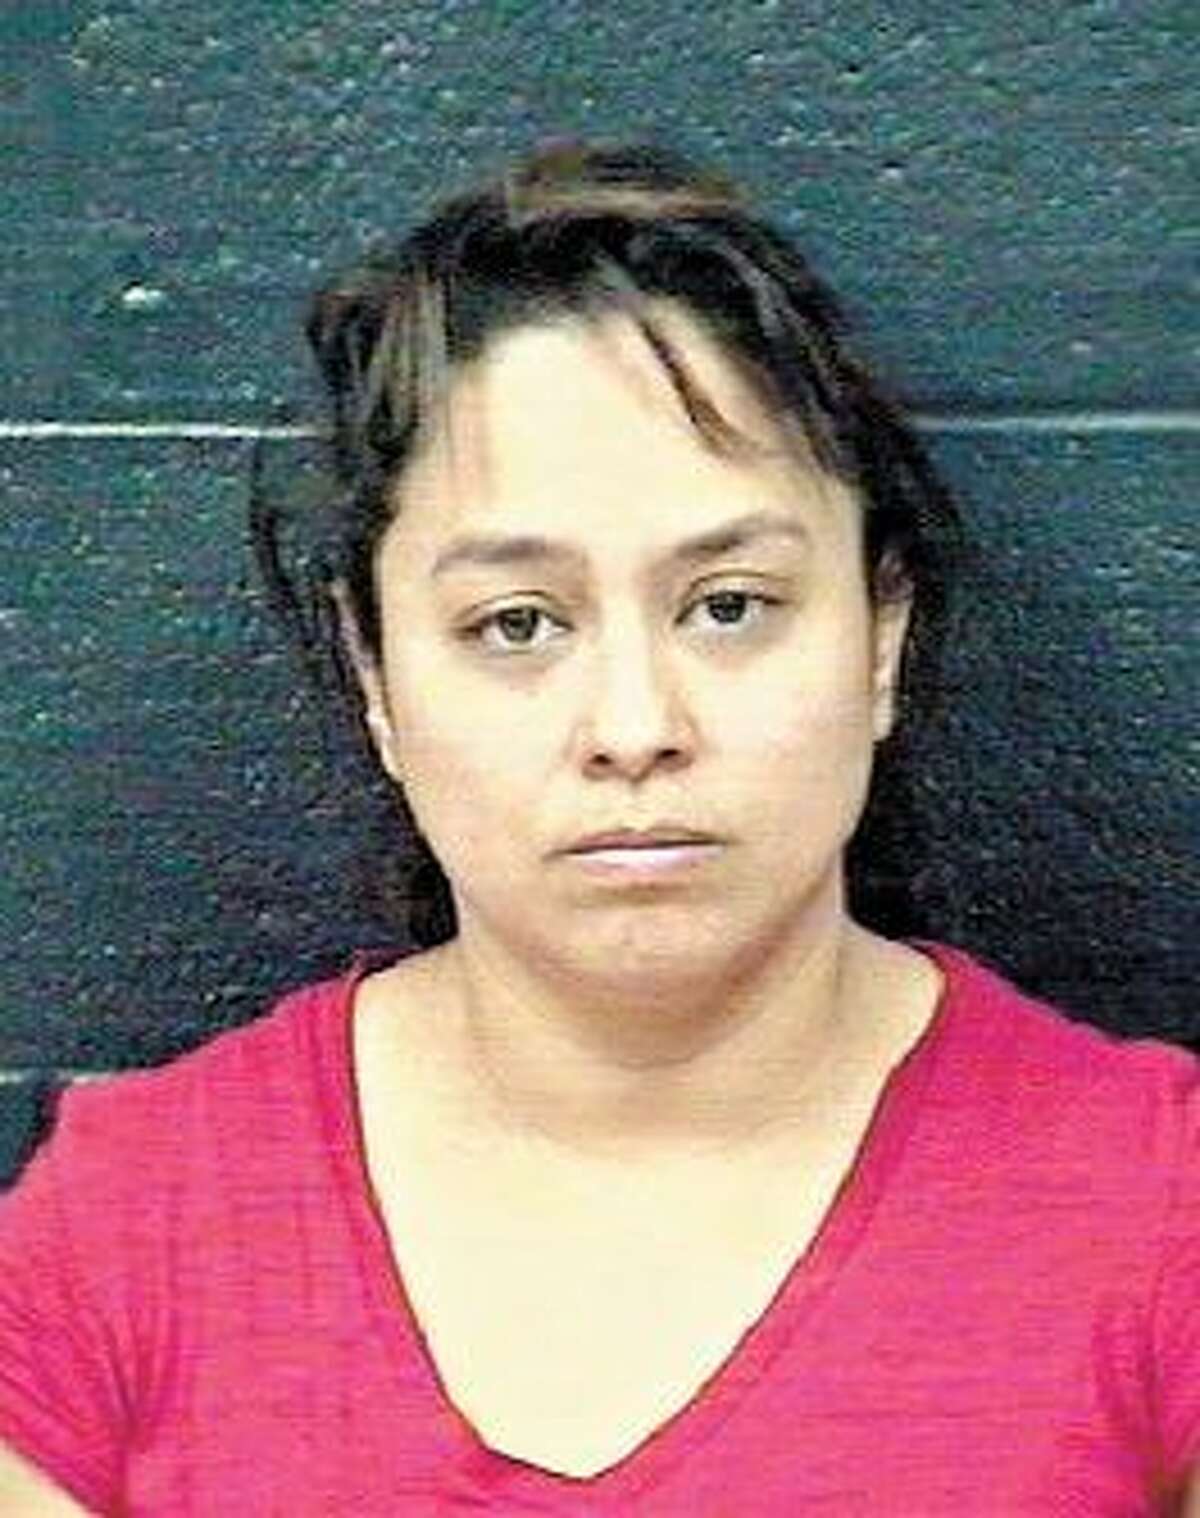 Maria "Wawi" Guadalupe Melendez Keep clicking through to see mugshots of the other members of the massive Melendez drug ring.